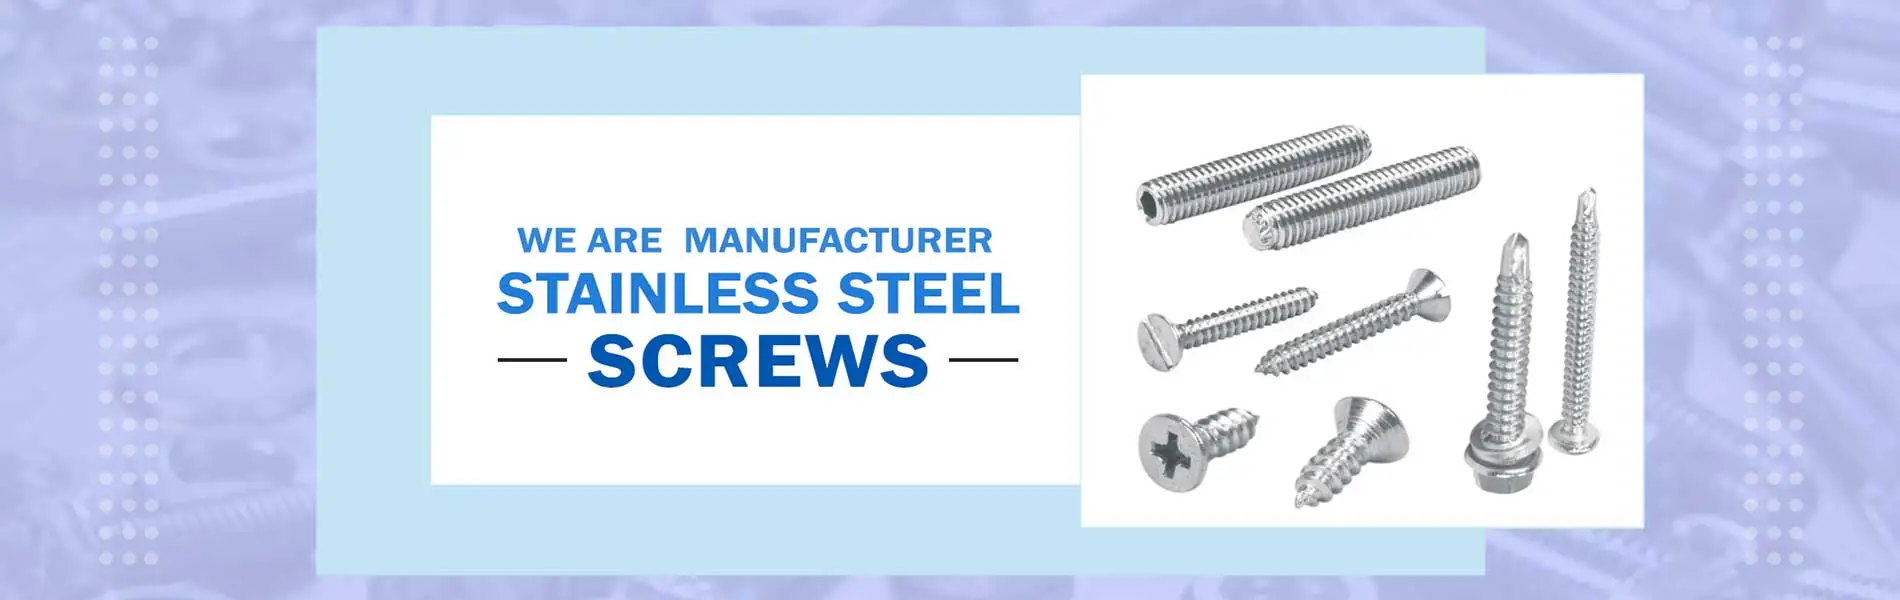 Stainless Steel Screw Manufacturer, Supplier and Exporter in Ahmedabad, Gujarat, India